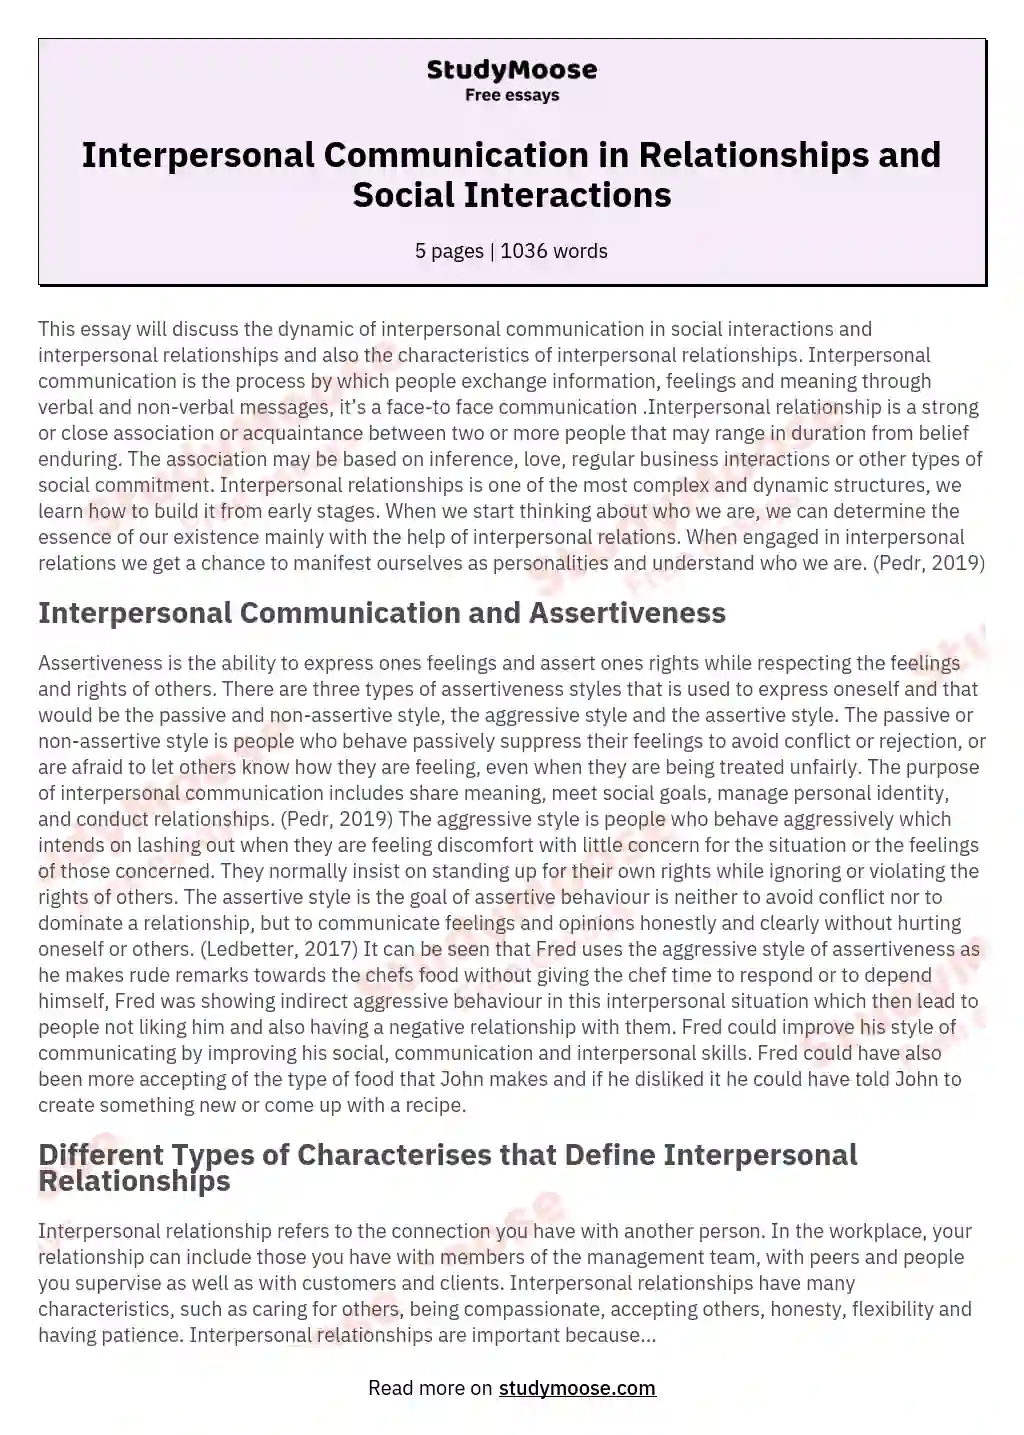 Interpersonal Communication in Social Interactions and Interpersonal Relationships